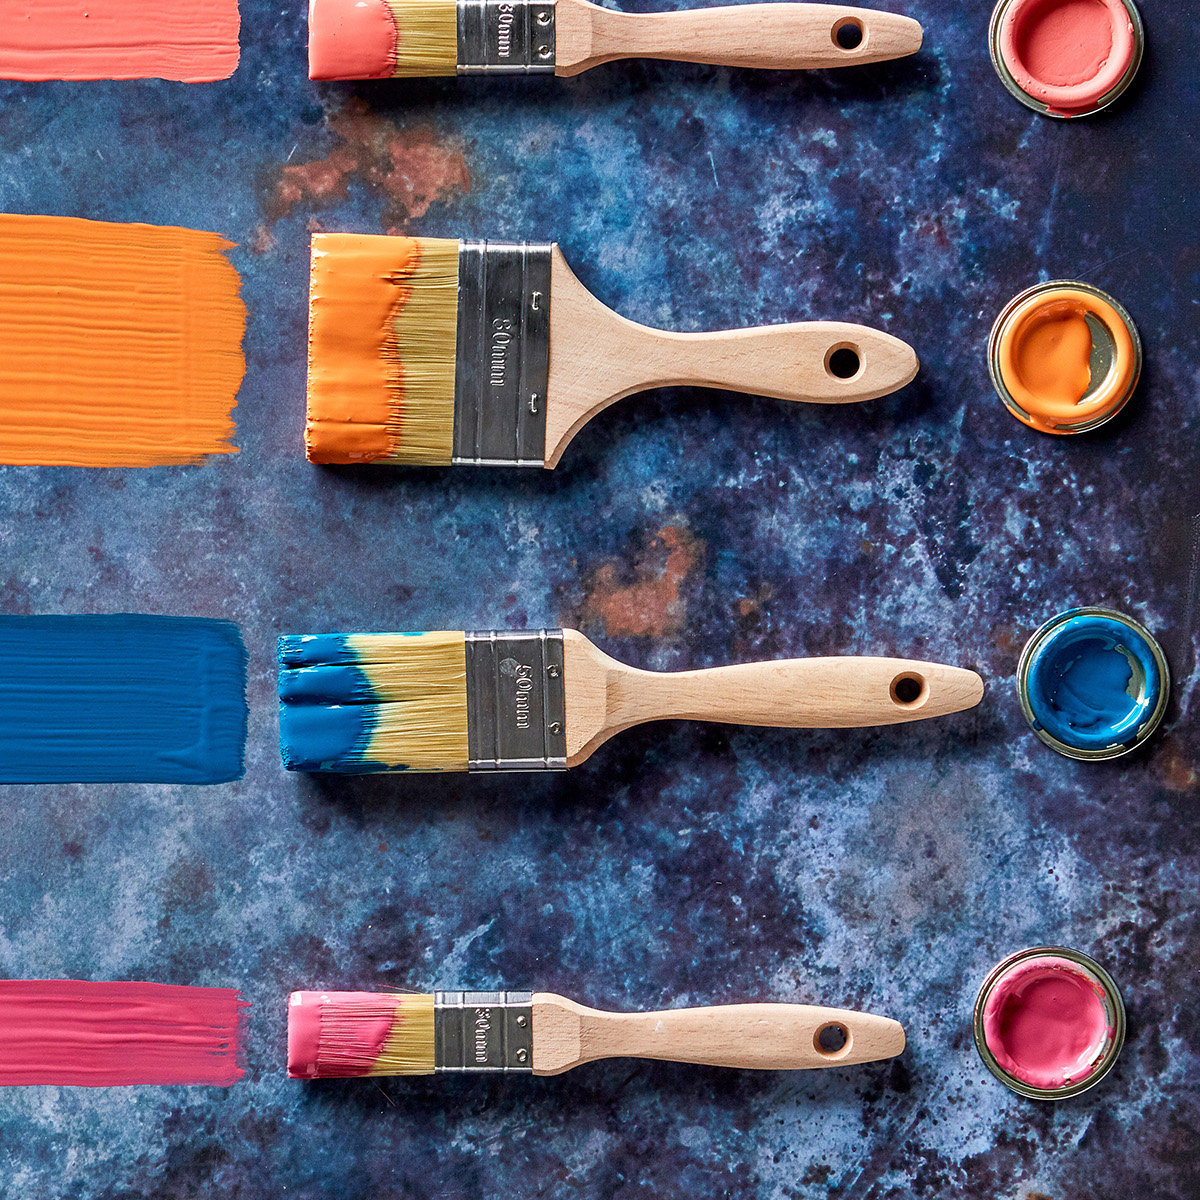 Find out more about colour combining and know what paint to to use where in a scheme. Find out more with Sophie Robinson as she looks at using the colour wheel as a guide. #colourwheel #colourcombining #sophierobinson